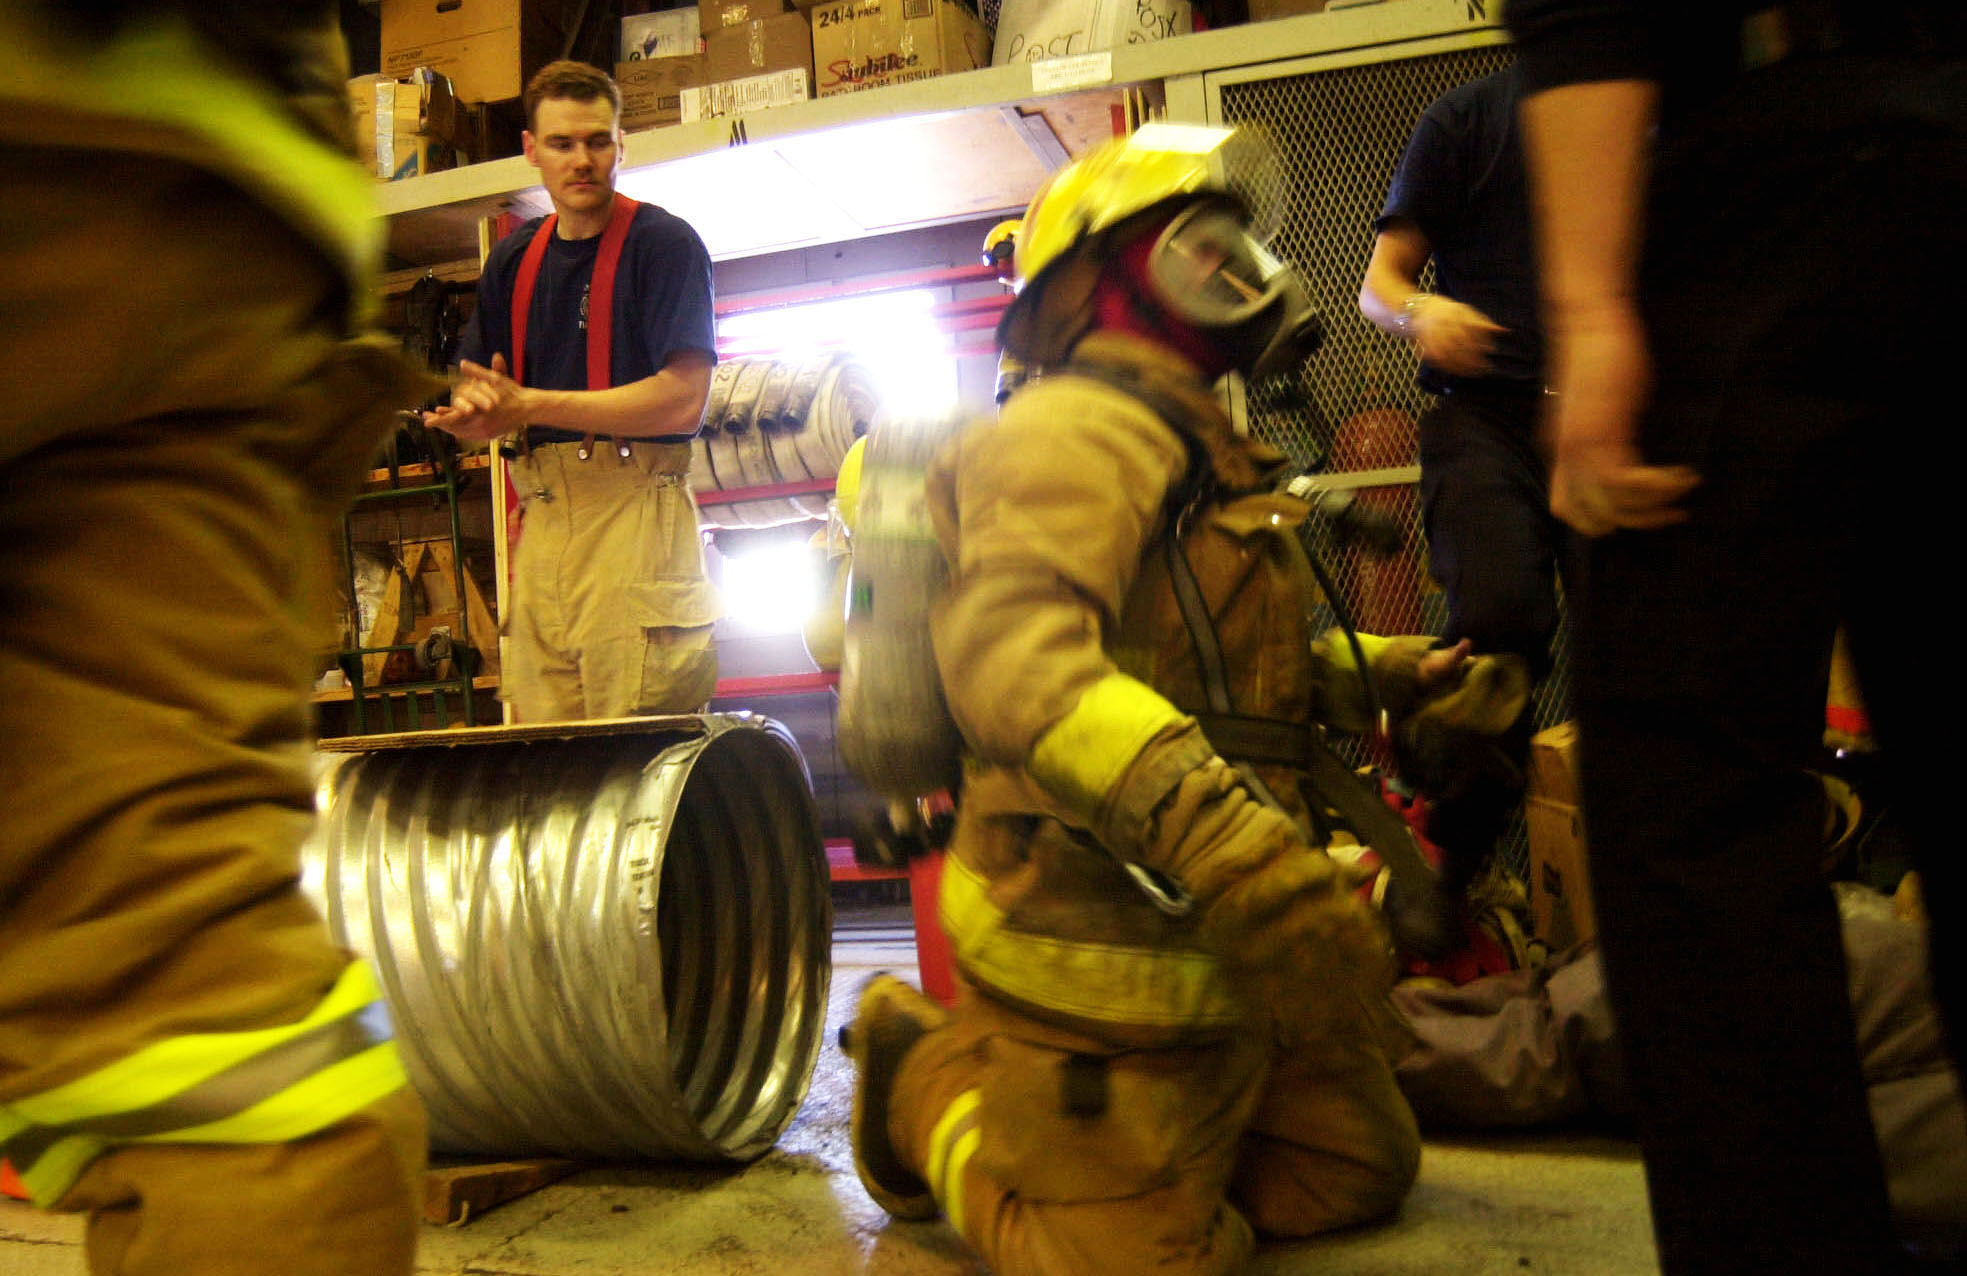 A firefighter emerges from a metal tube-like tunnel.